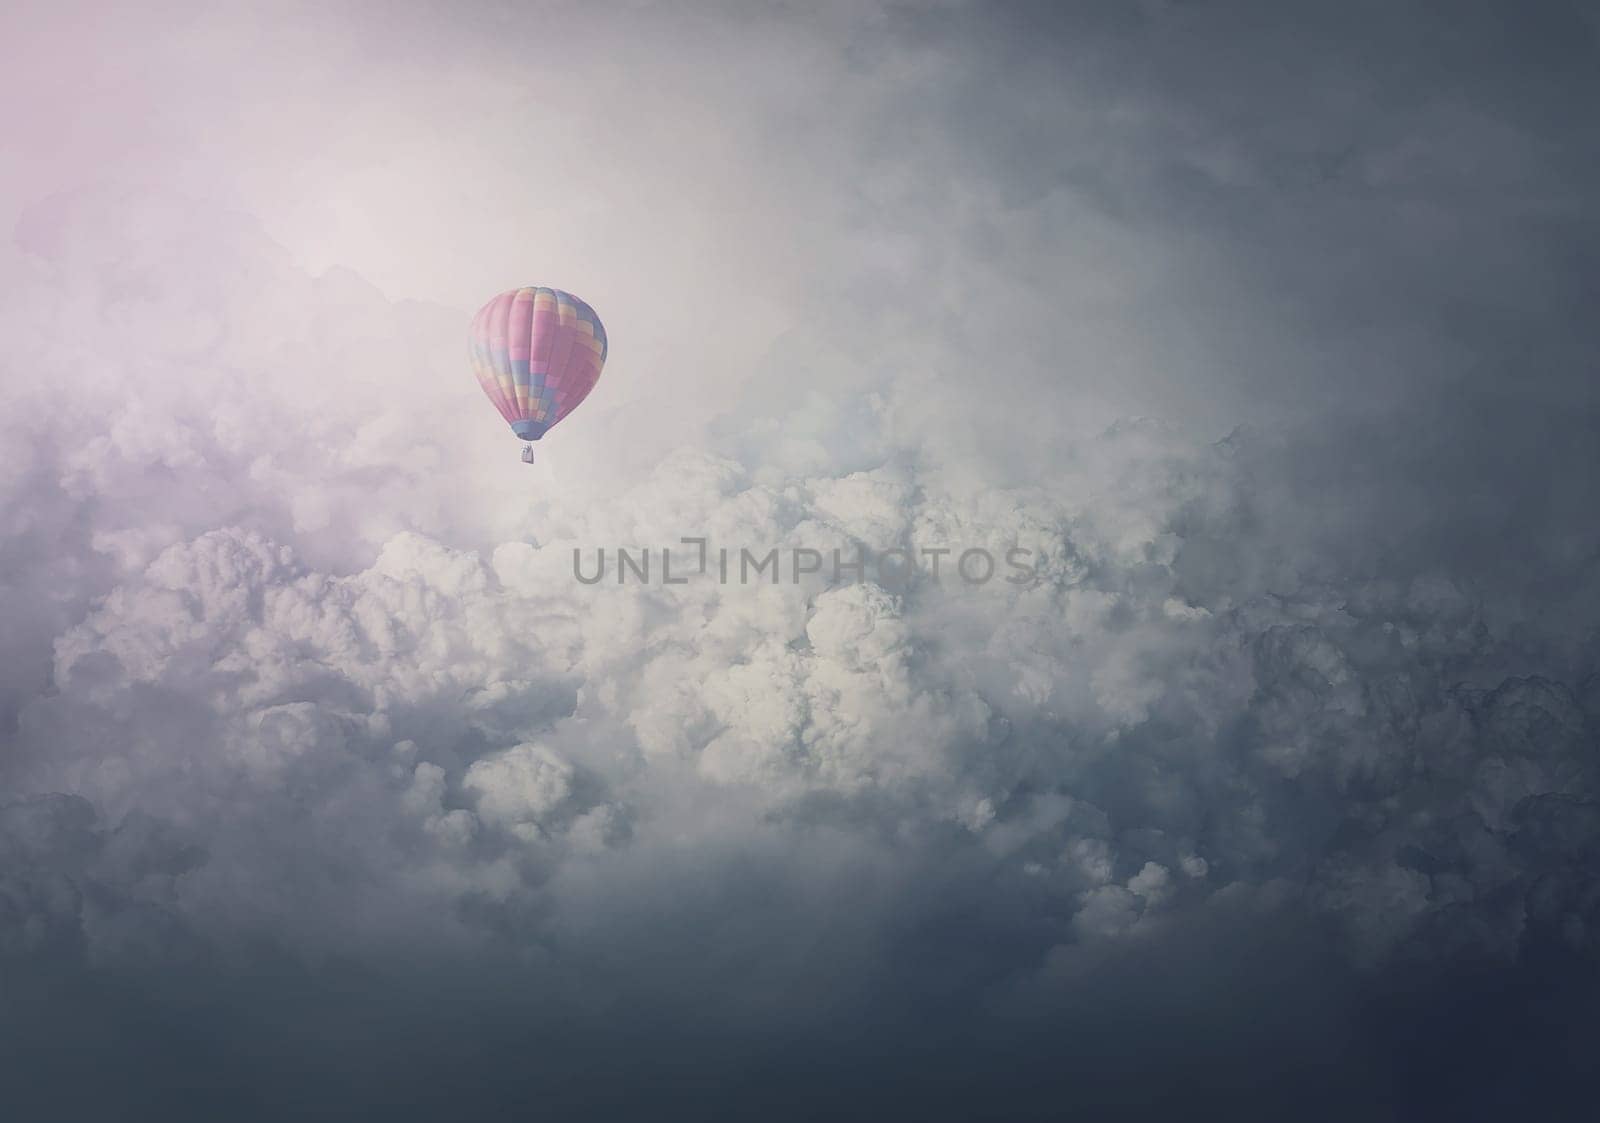 Wonderful adventure, epic scene with a hot air balloon flying over the clouds. Fabulous minimalist view, airship floating in the sky. Travel and journey concept. Inspirational cloudscape scenery by psychoshadow